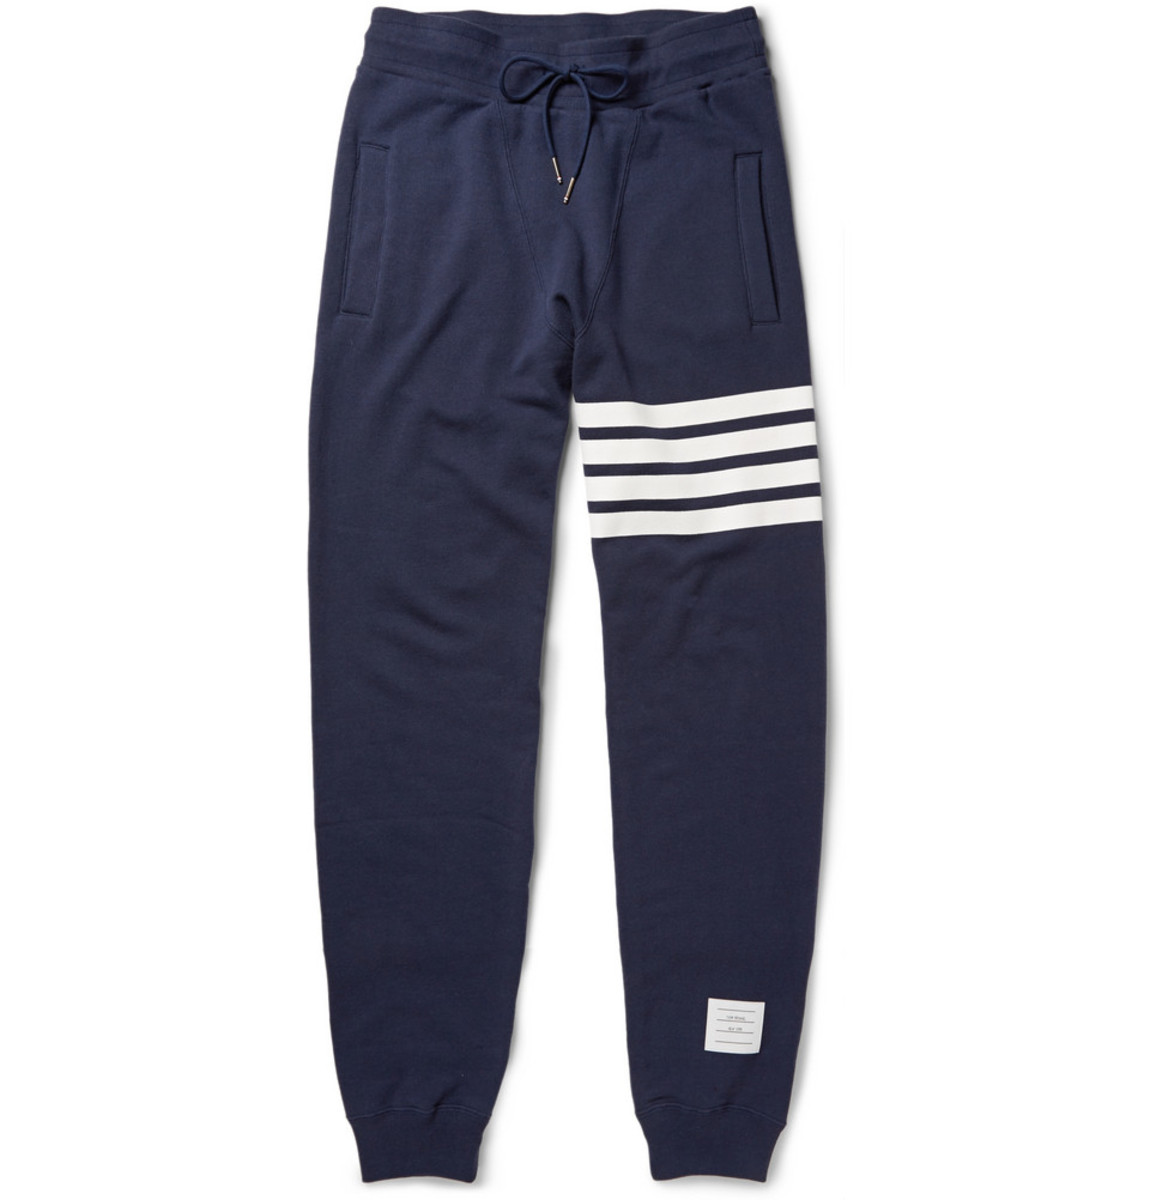 Our 11 Favorite Sweatpants To Get Cozy This Fall & Winter - Airows